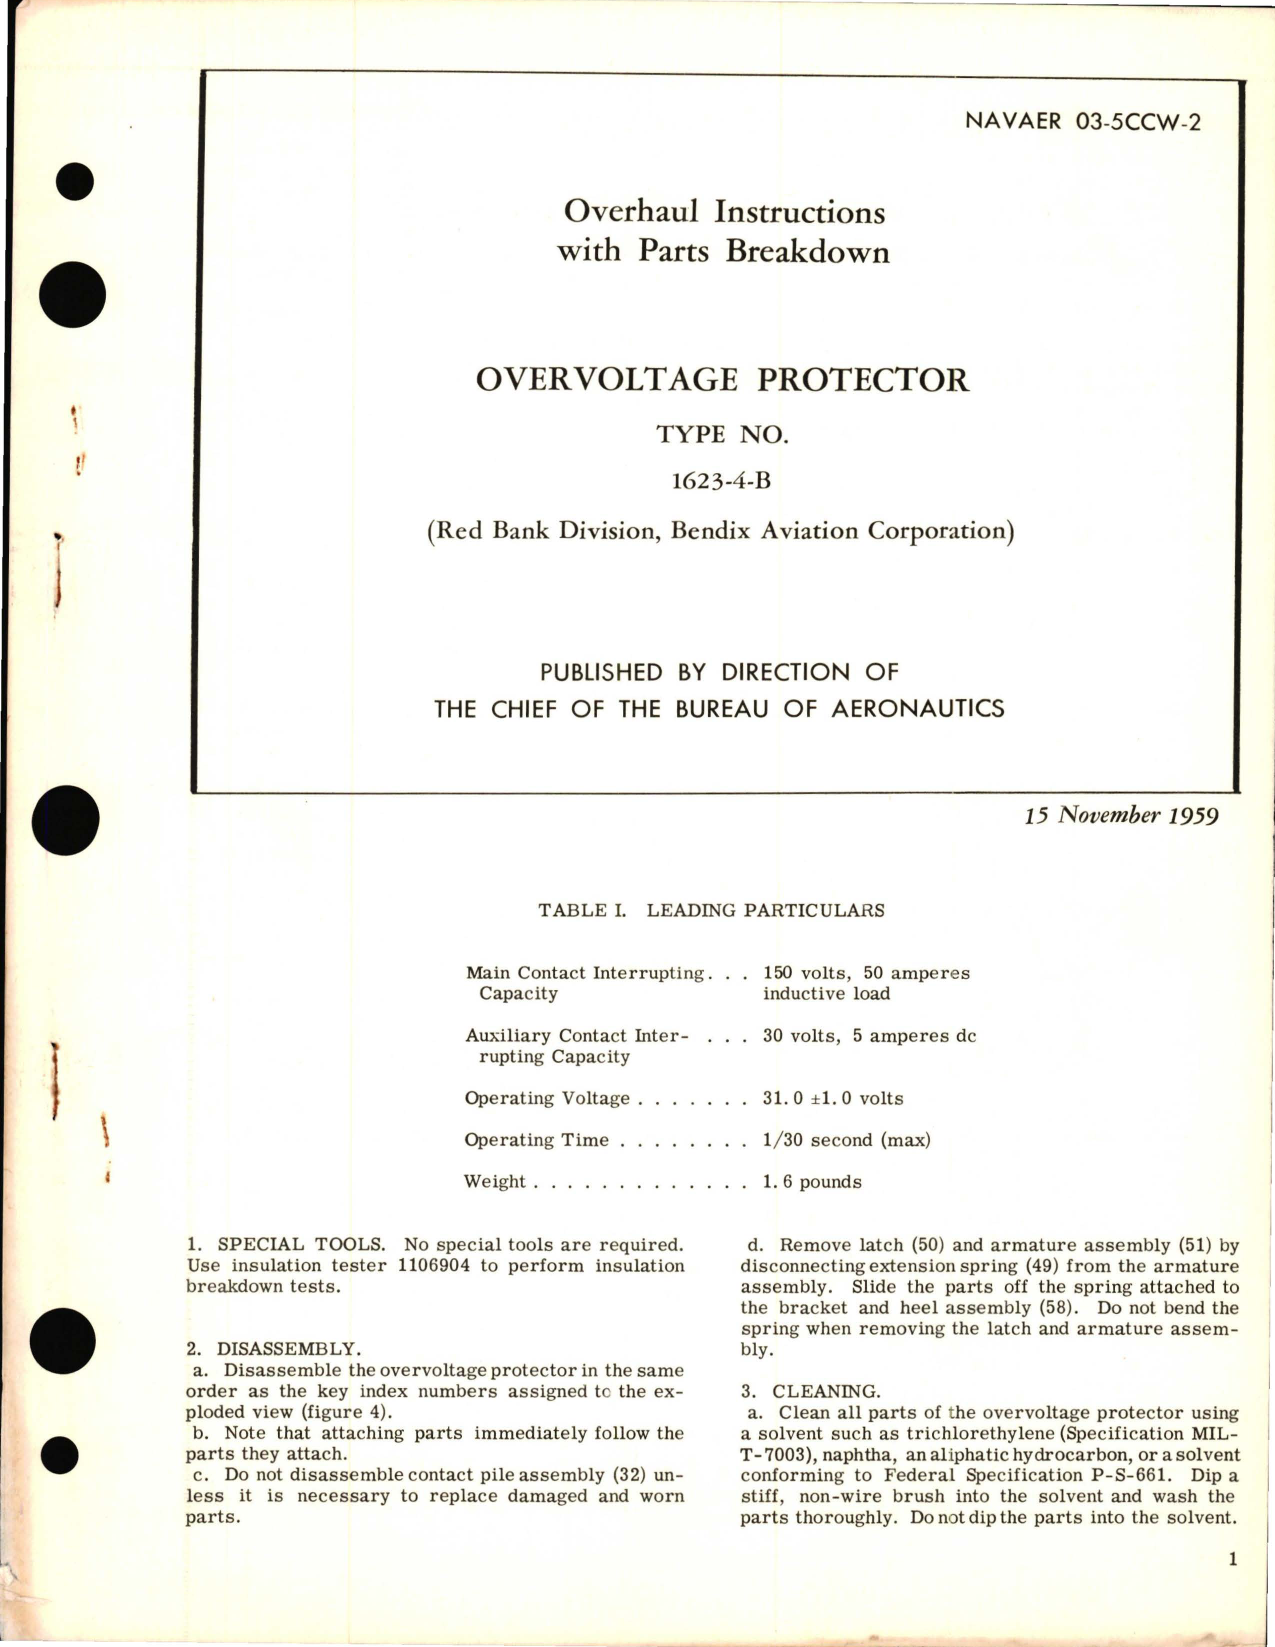 Sample page 1 from AirCorps Library document: Overhaul Instructions with Parts Breakdown for Overvoltage Protector Type 1623-4-B